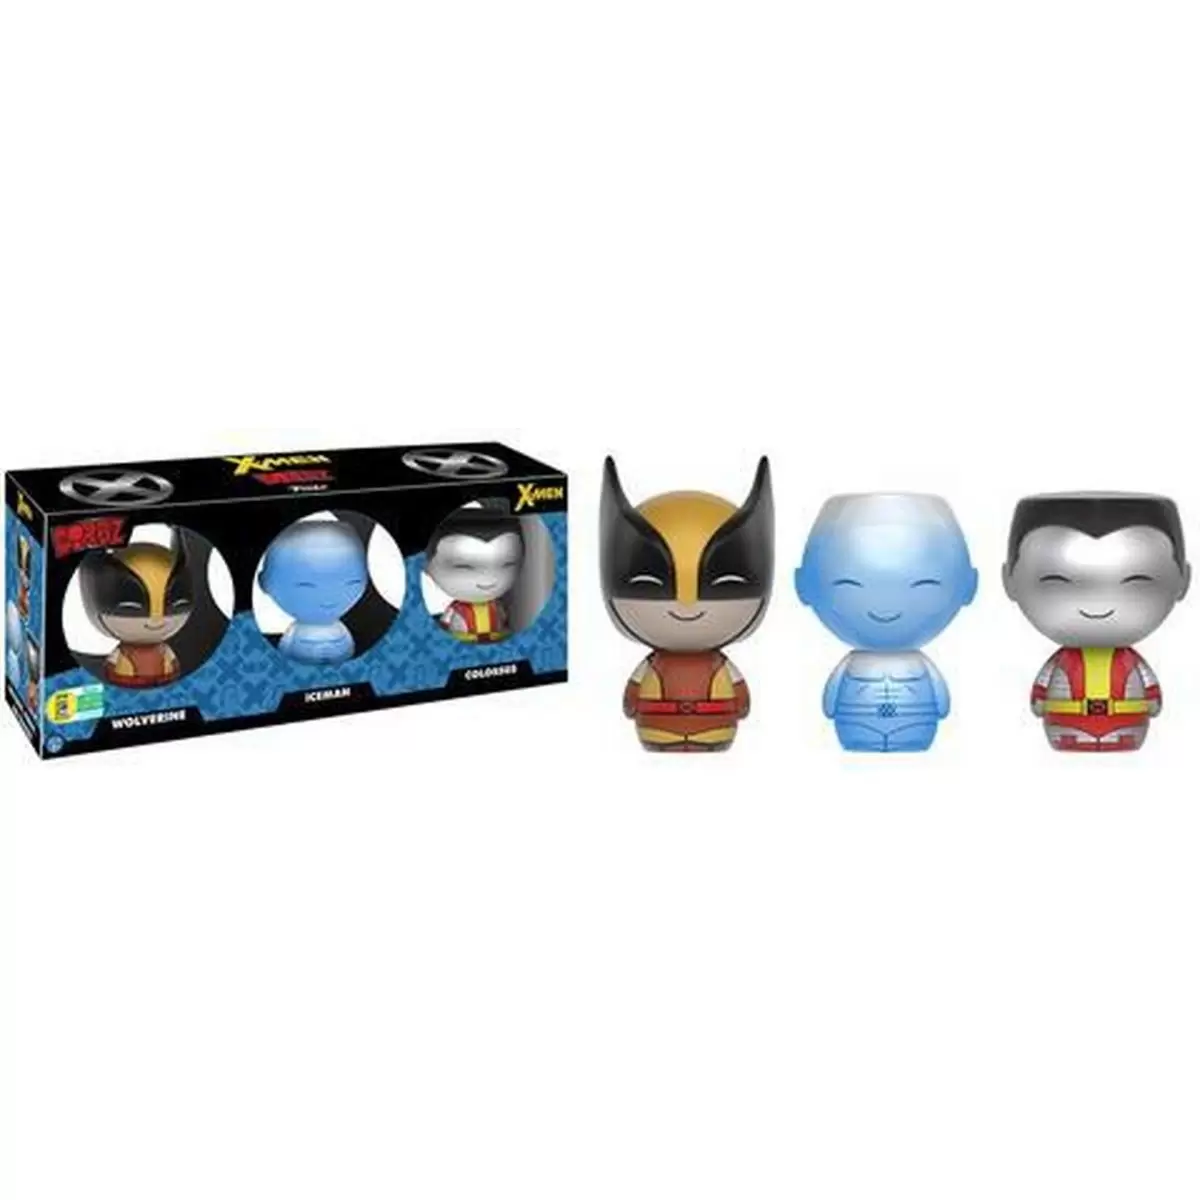 Dorbz - X-men - Wolverine, Iceman And Colossus 3 Pack